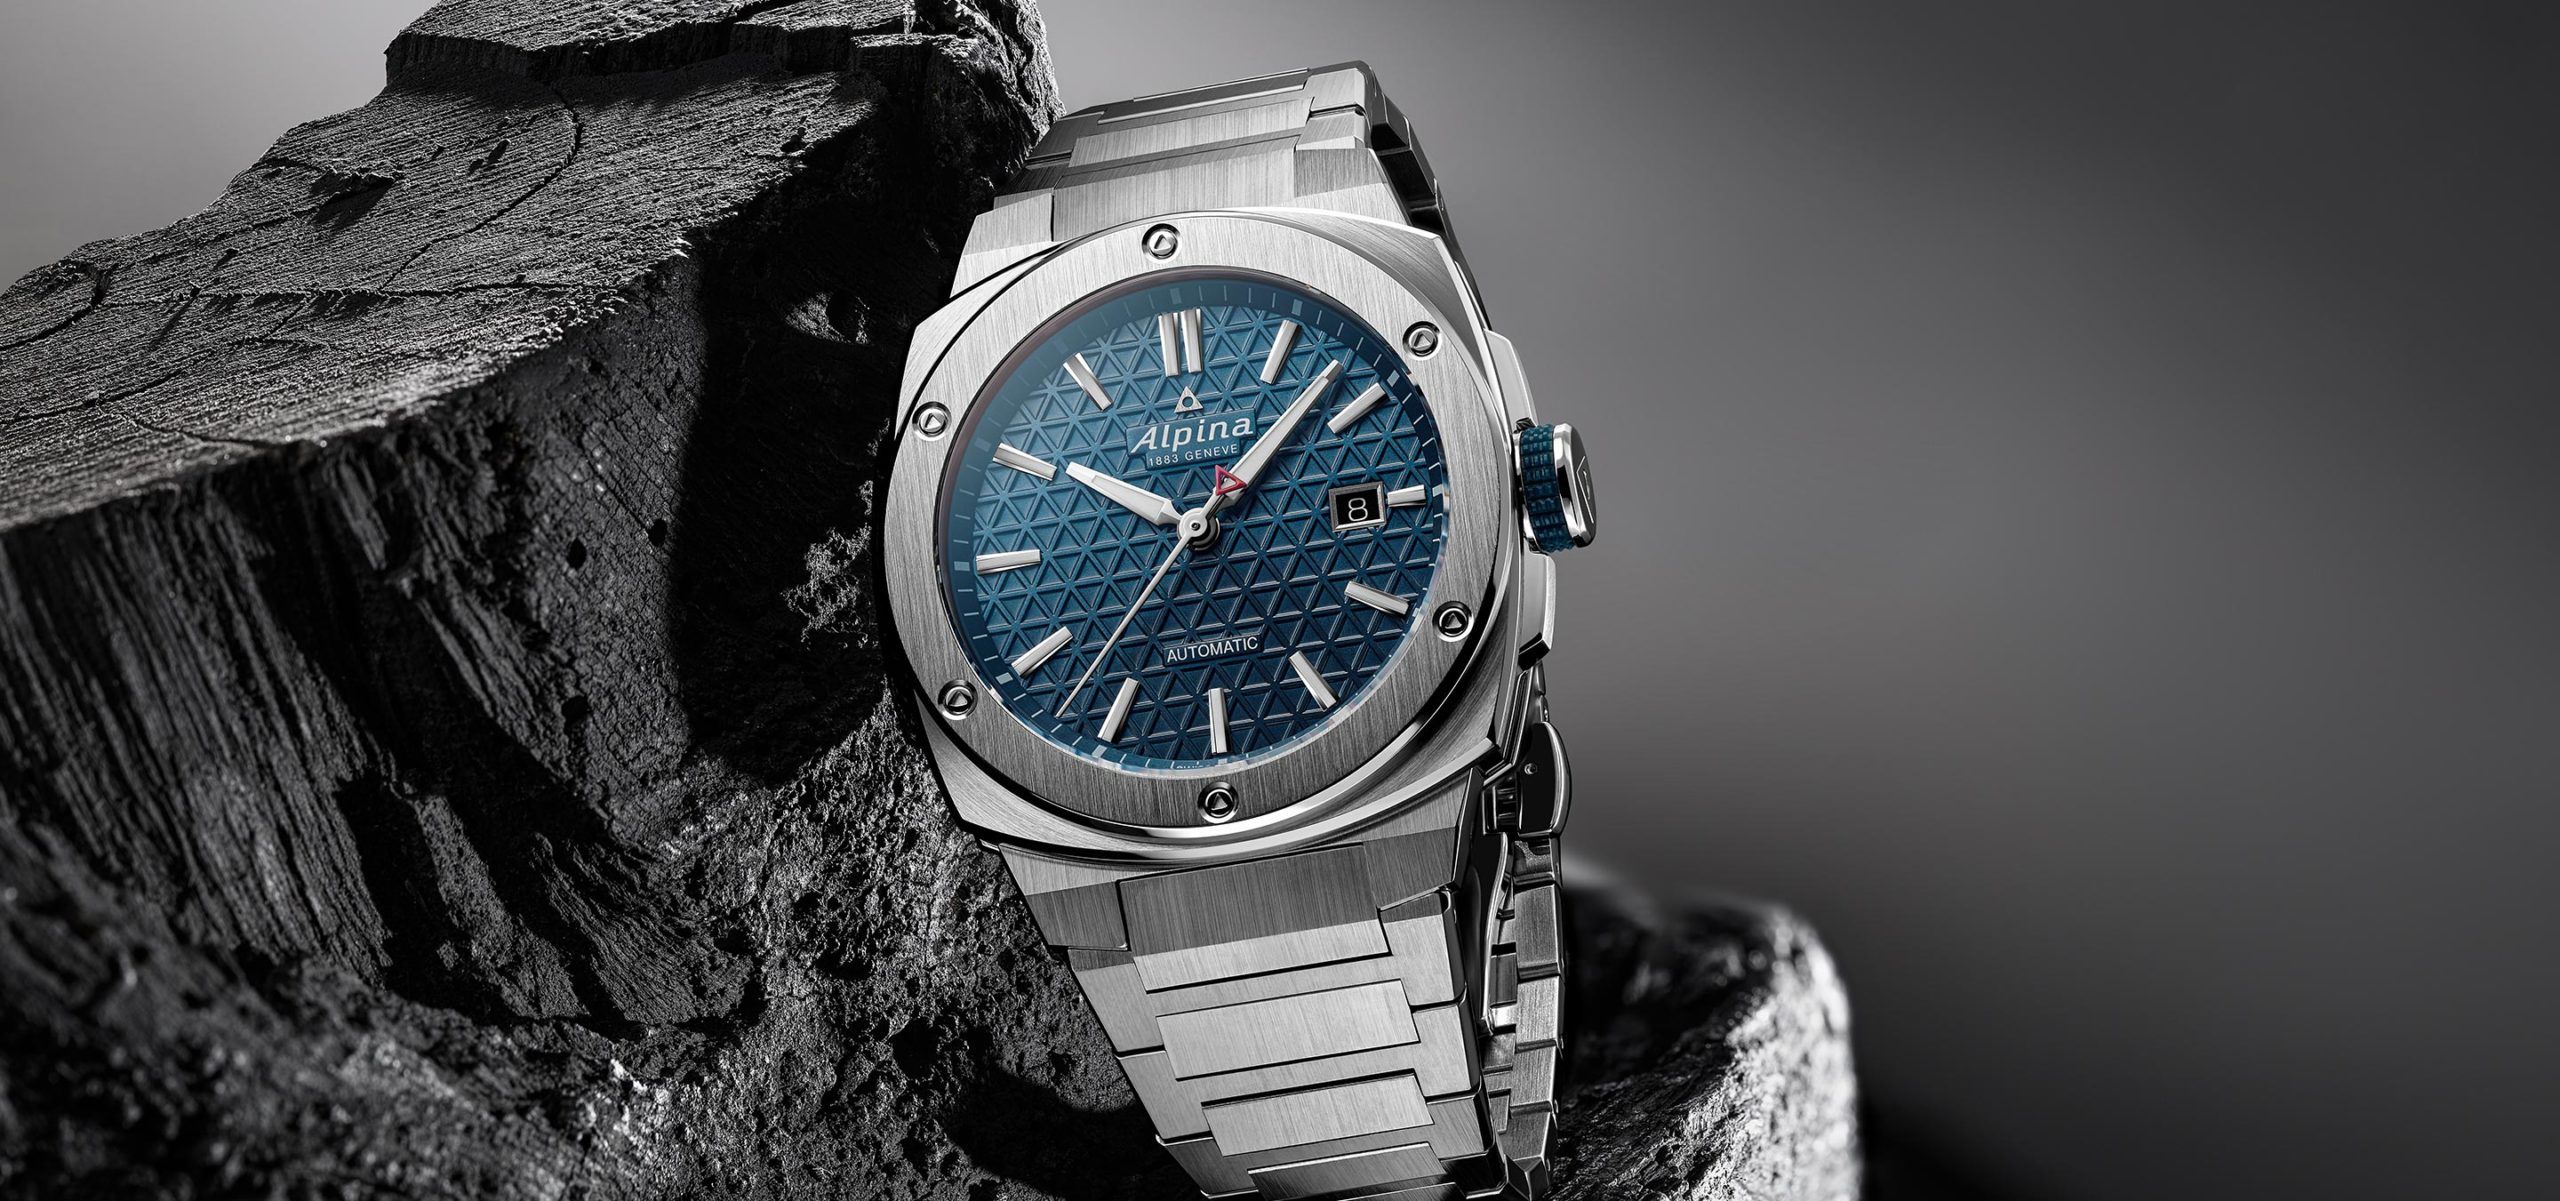 A Symphony Of Integrated Steel: Presenting the Alpina Alpiner Extreme Automatic